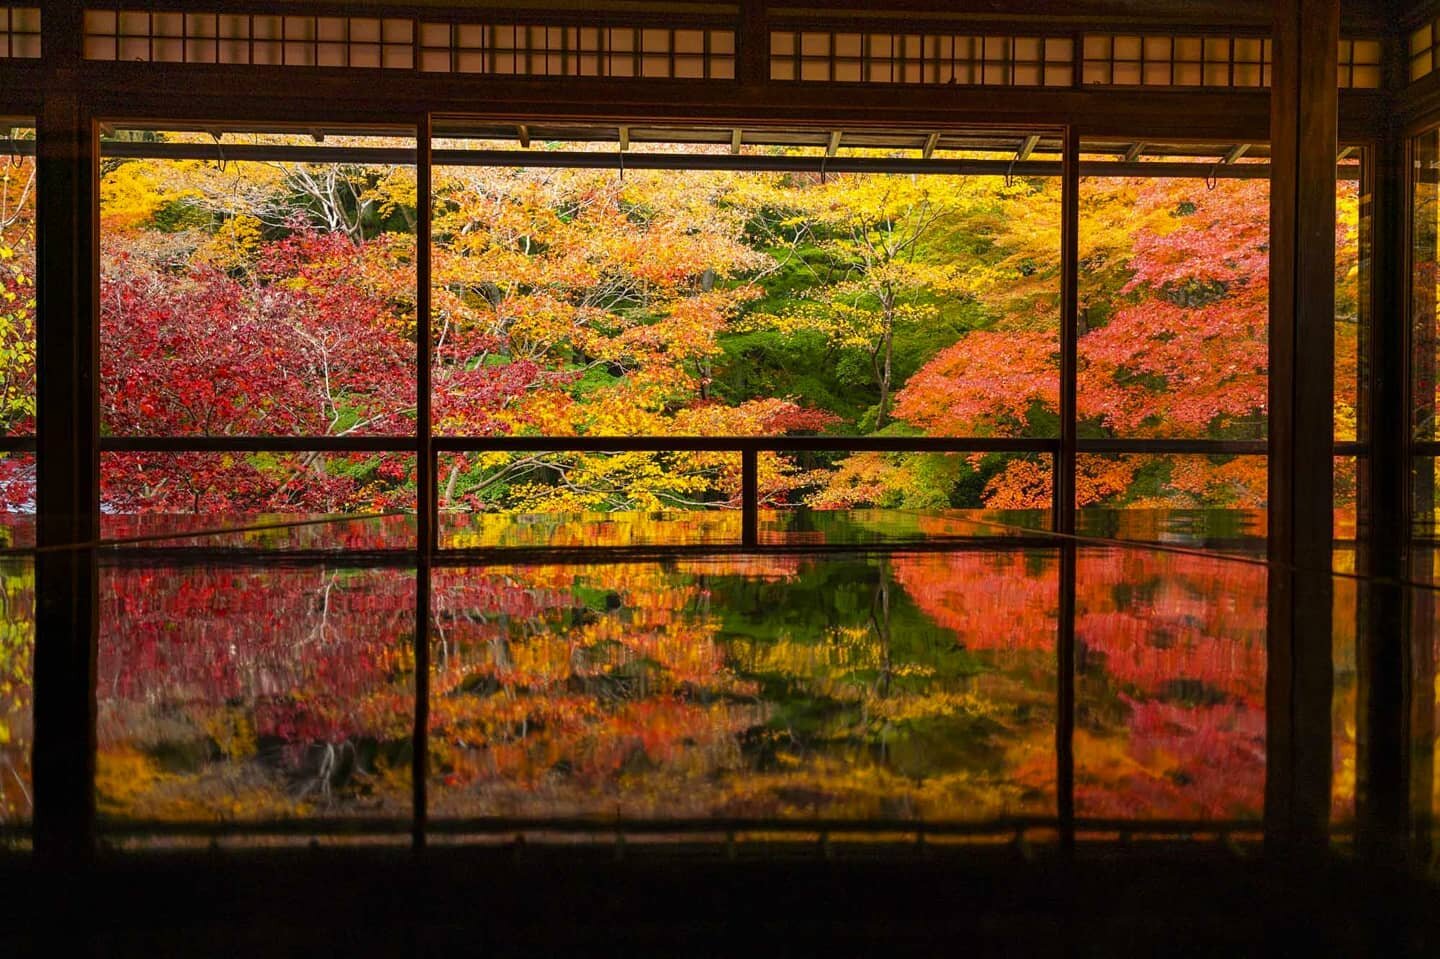 Autumn is probably my most favourite time of year and my trip to #Japan end of 2019 saw me getting around to some amazing autumn locations. Especially near the city of Kyoto. Swipe across to see some of my favourite autumn images from my travels in J